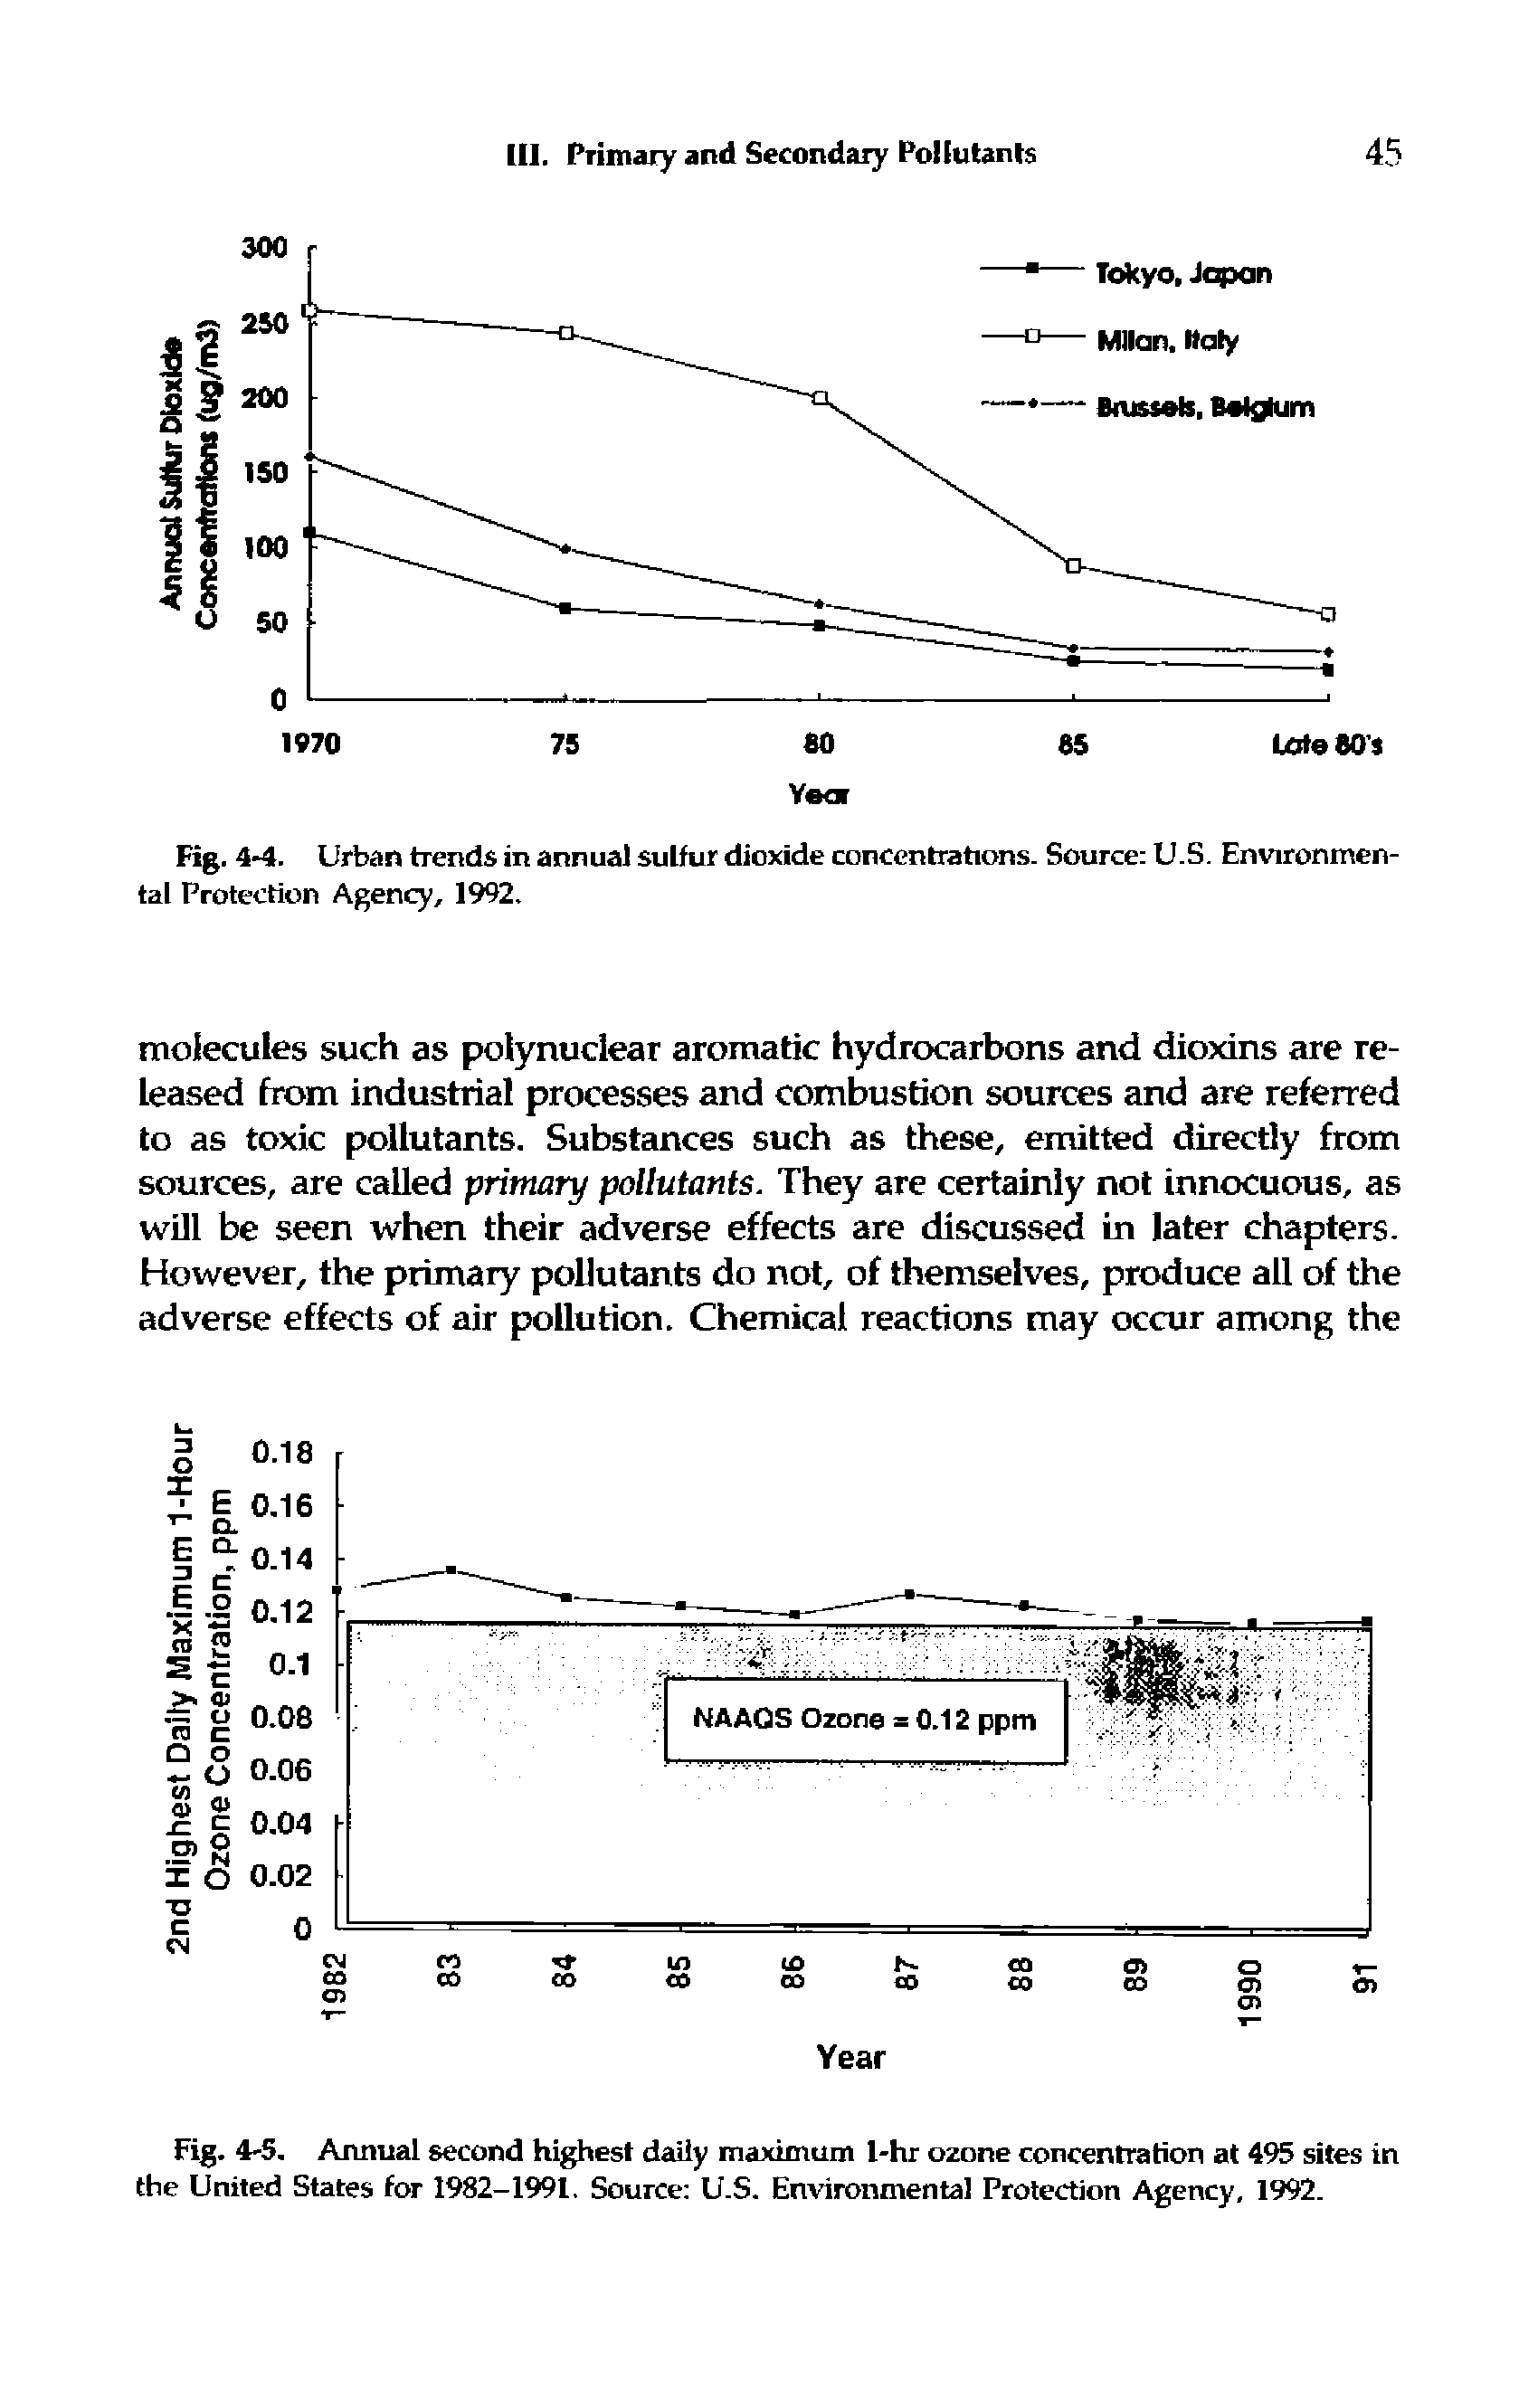 Fig. 4-4. Urban trends in annual sulfur dioxide concentrations. Source U.S. Environmental Protection Agency, 1992,...